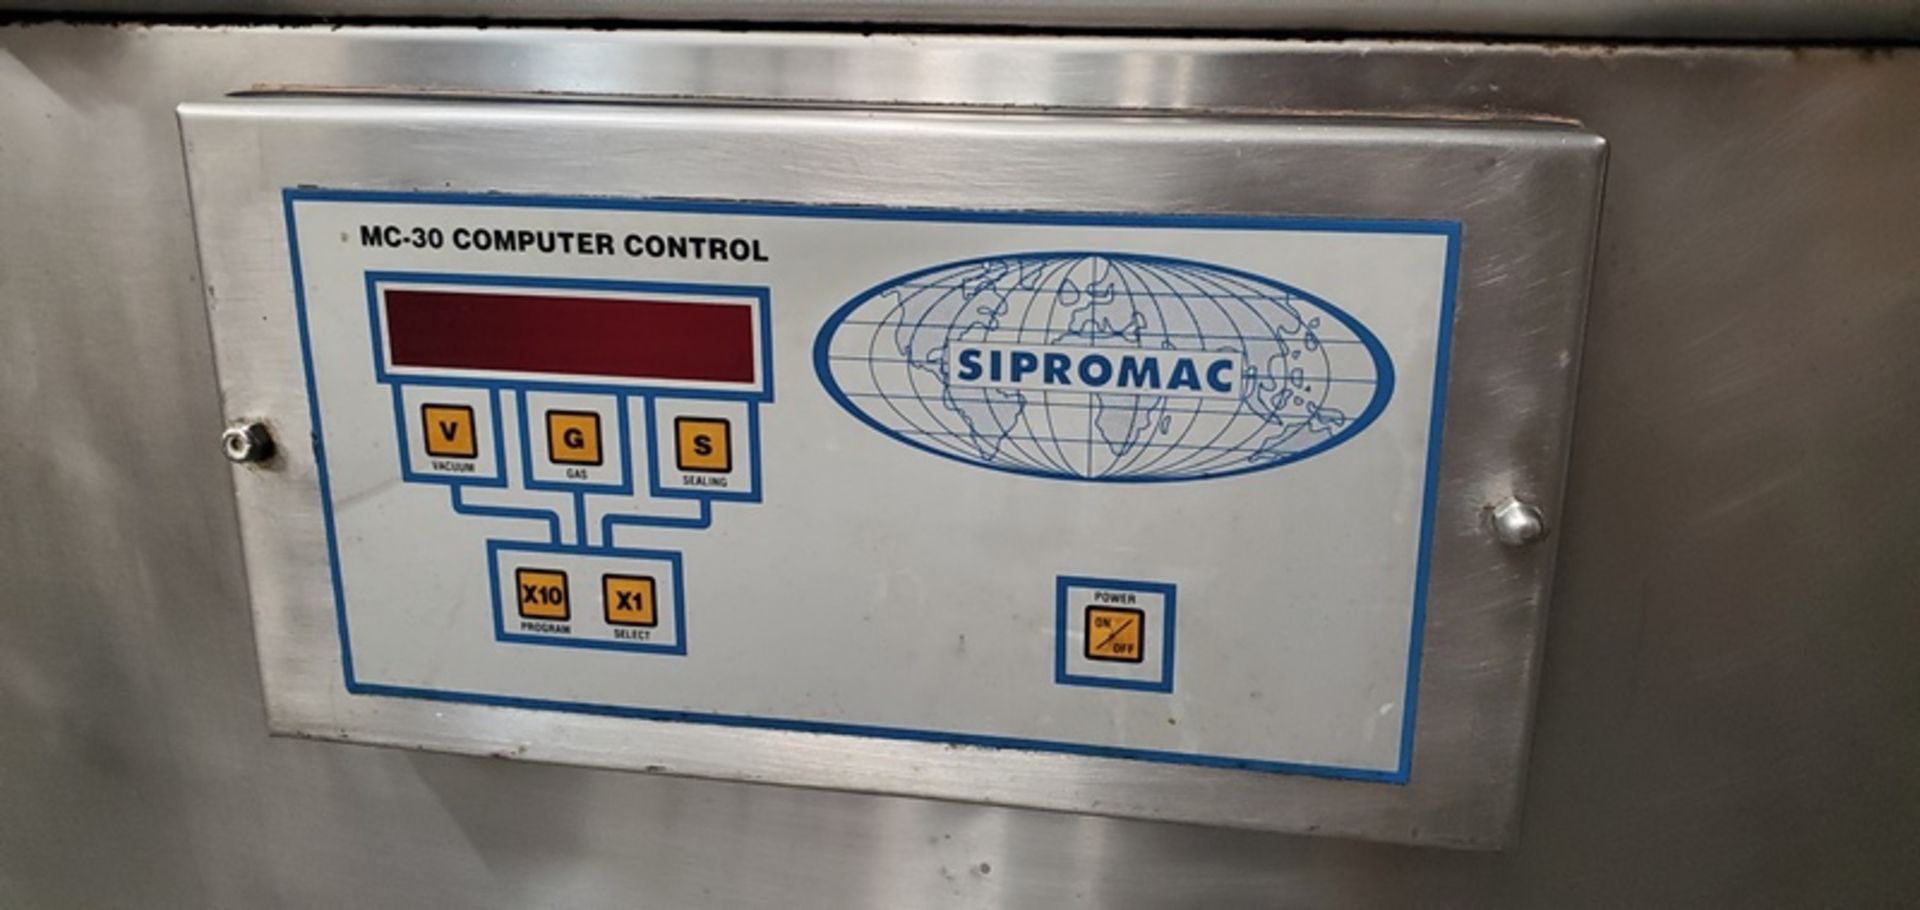 Sipromac Mdl. 650A Double Chamber Vacuum Packaging Machine, Ser. #02353, 208V/3PH/60Hz, missing some - Image 4 of 10